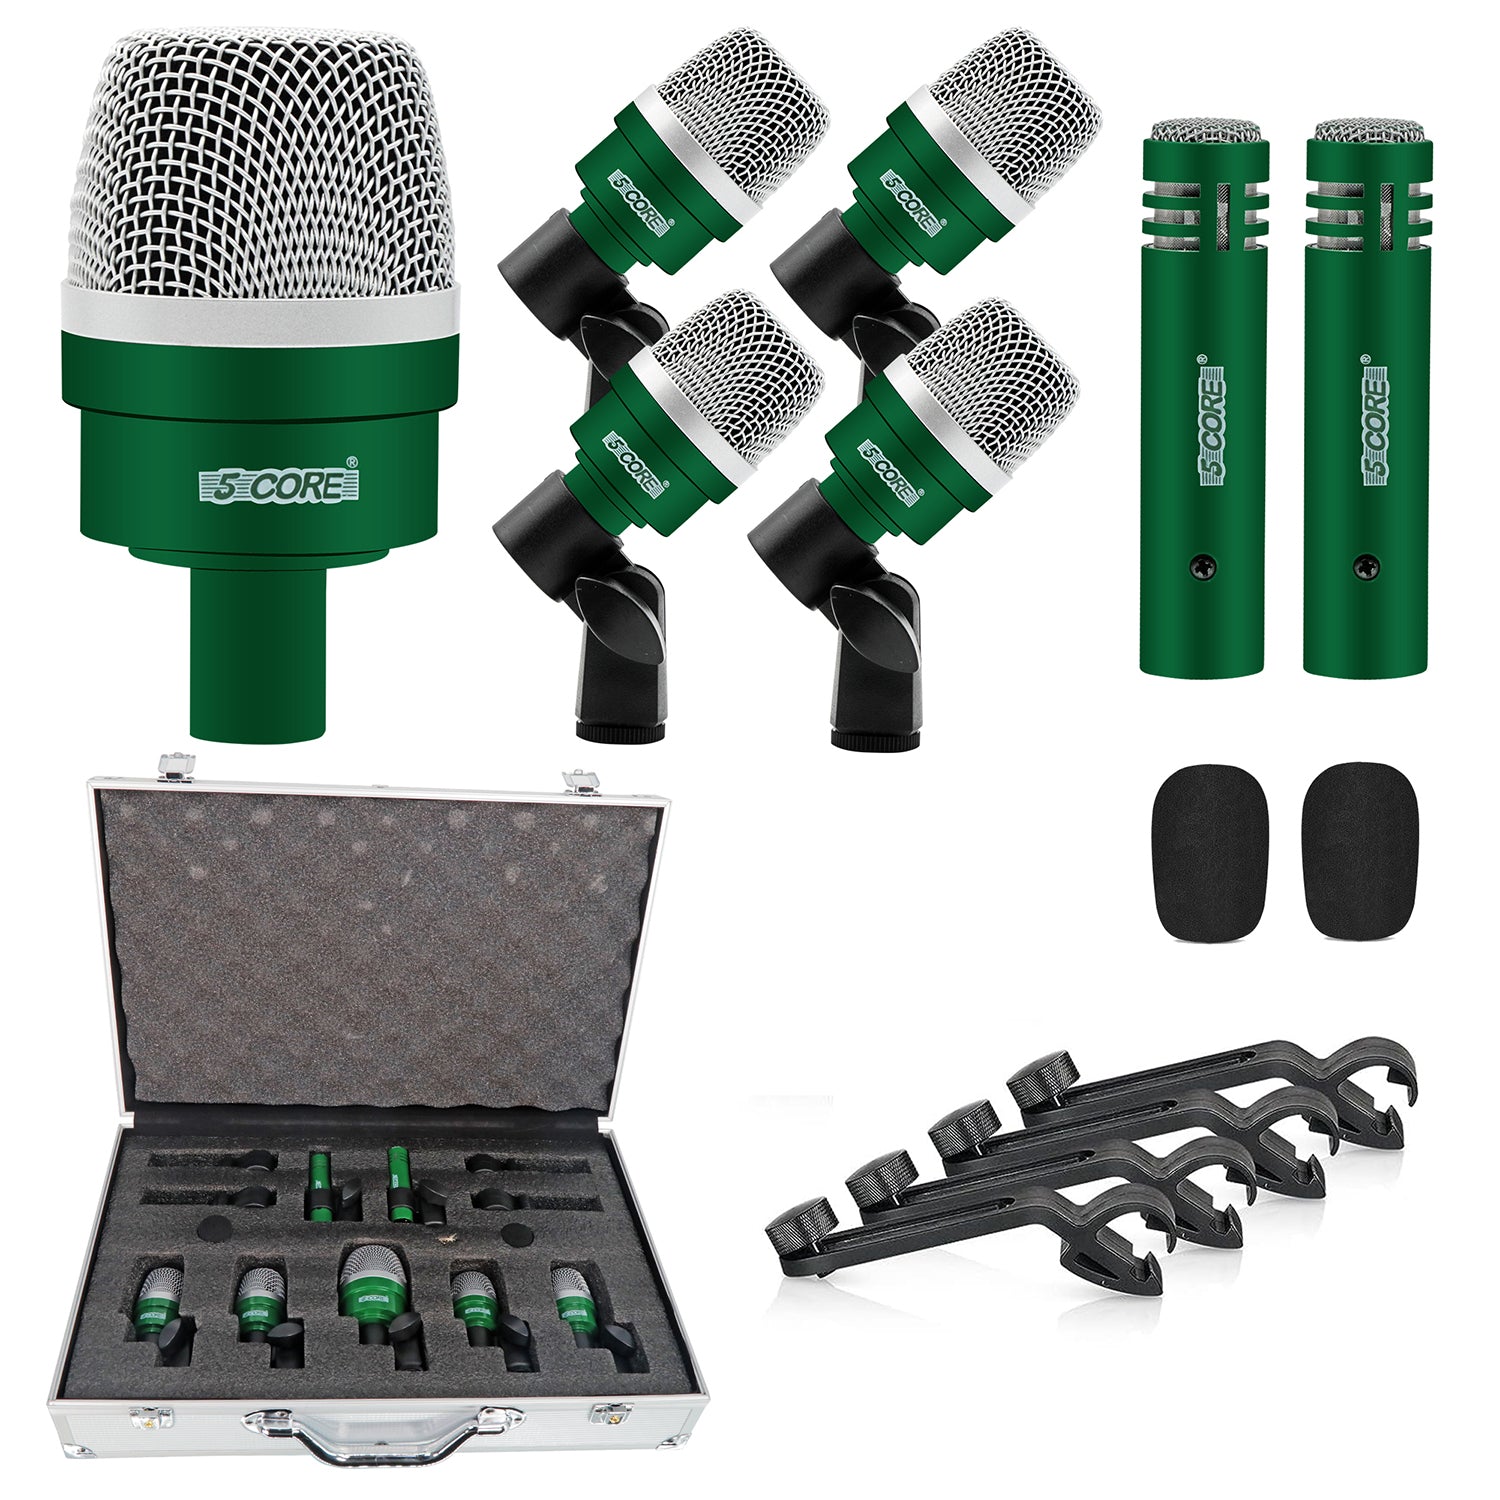 5Core Drum Mic Kit 7 Piece Dynamic XLR Kick Bass Tom Snare Microphone Set for Drummers Green